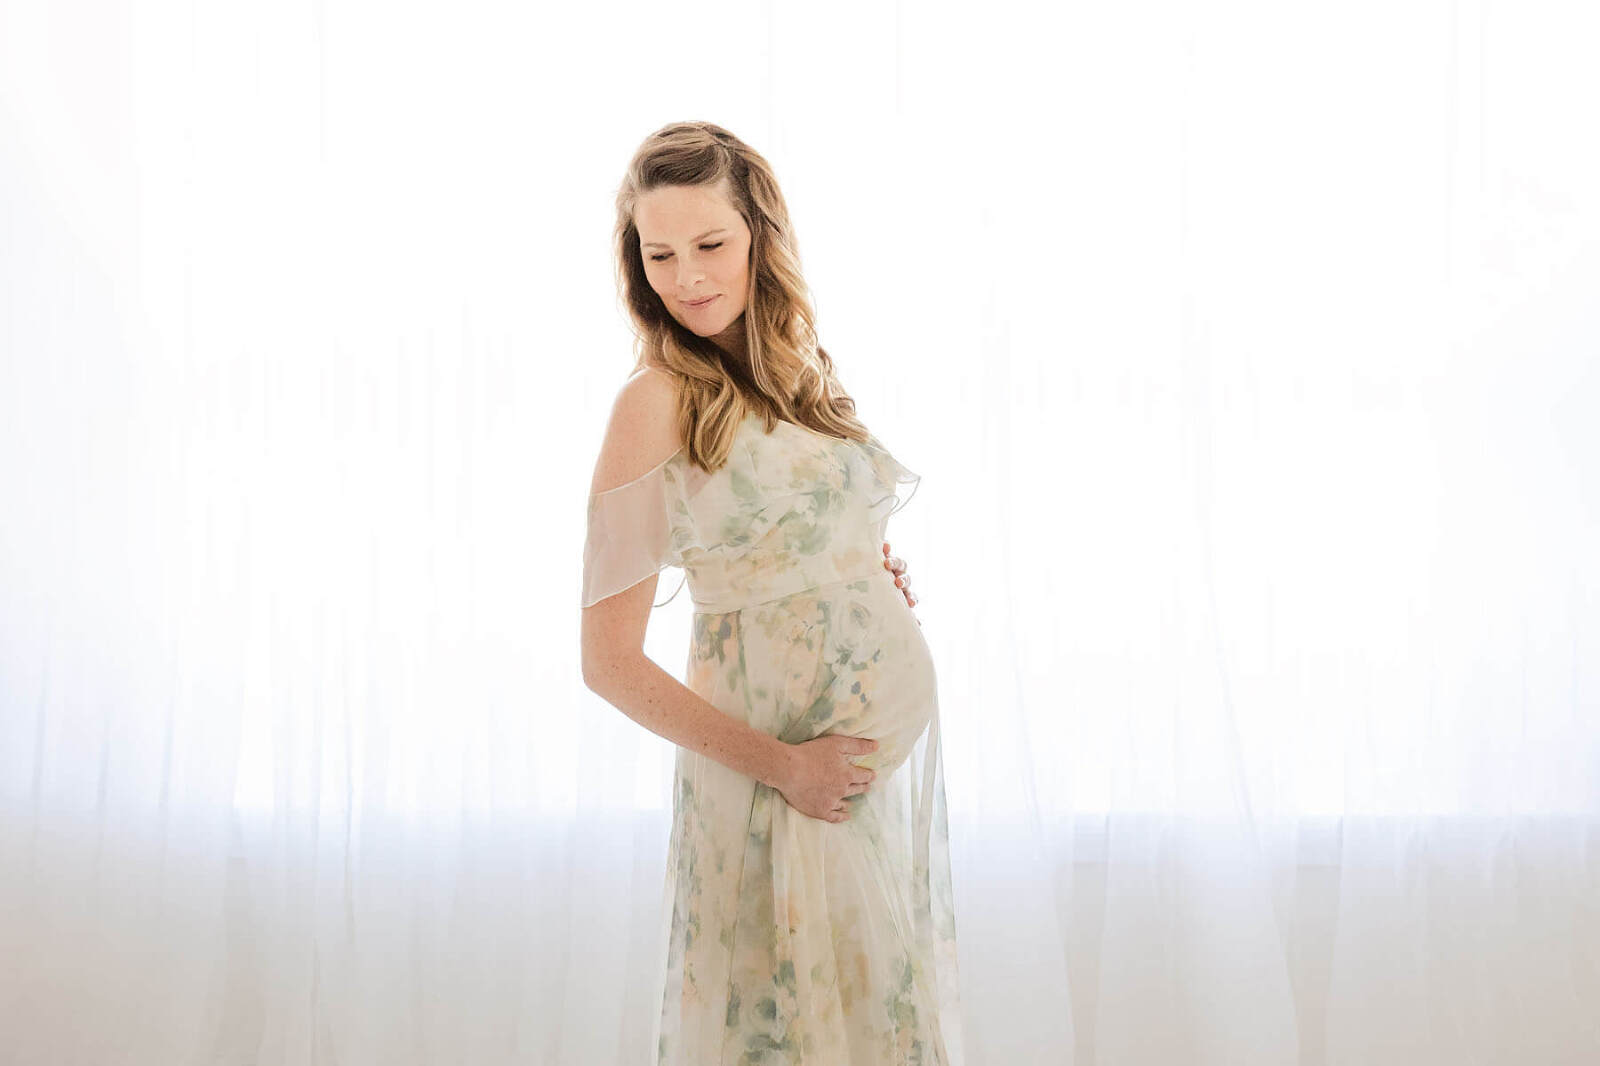 maternity photographer Birmingham Al mom in ethereal dress in front of light filled window